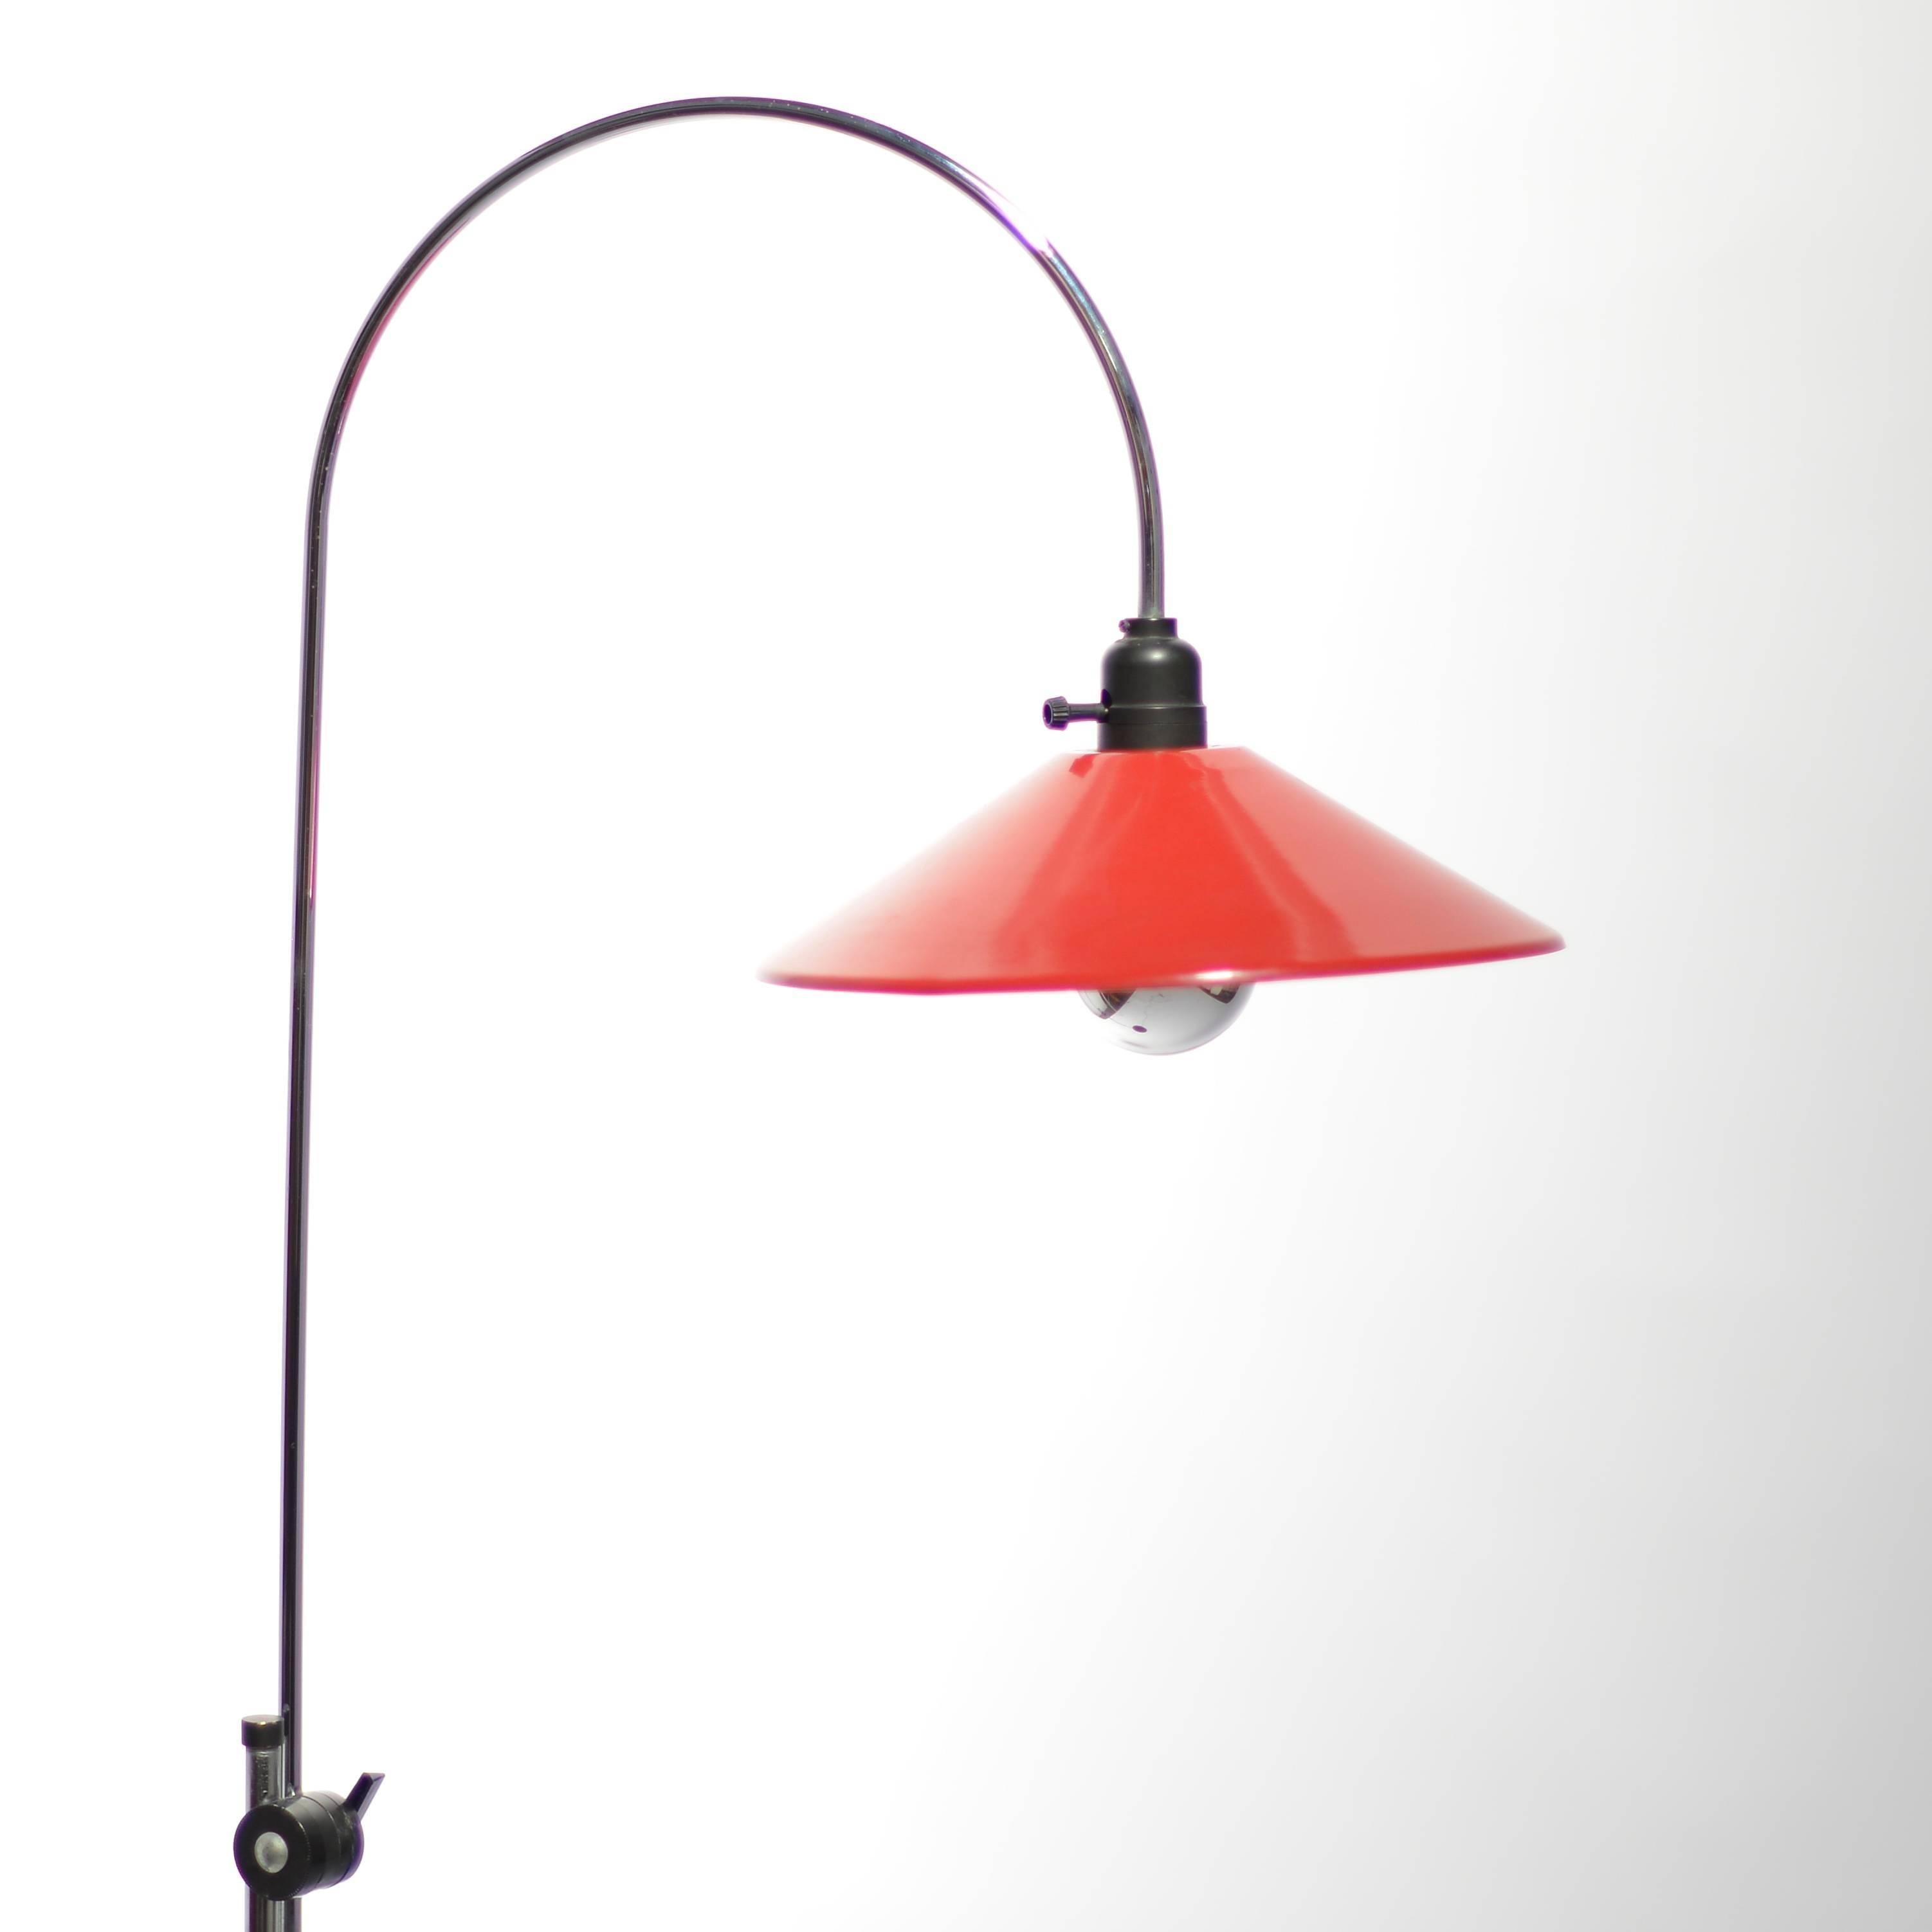 Very elegant Italian modern floor lamp, circa 1965. This lamp is in excellent and original condition.